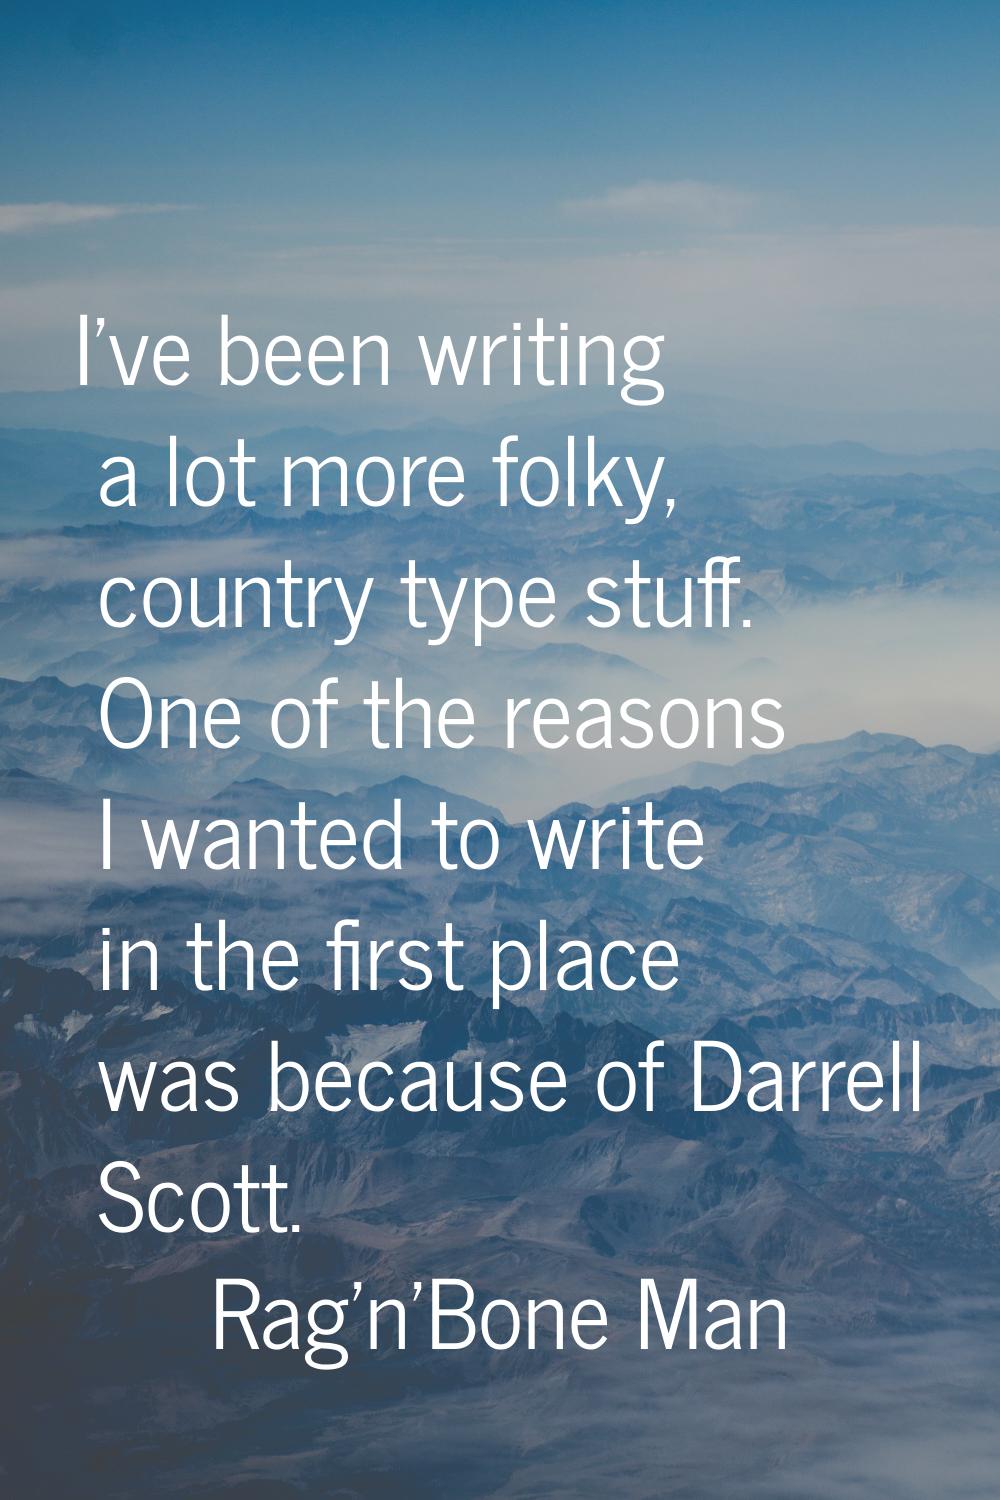 I've been writing a lot more folky, country type stuff. One of the reasons I wanted to write in the